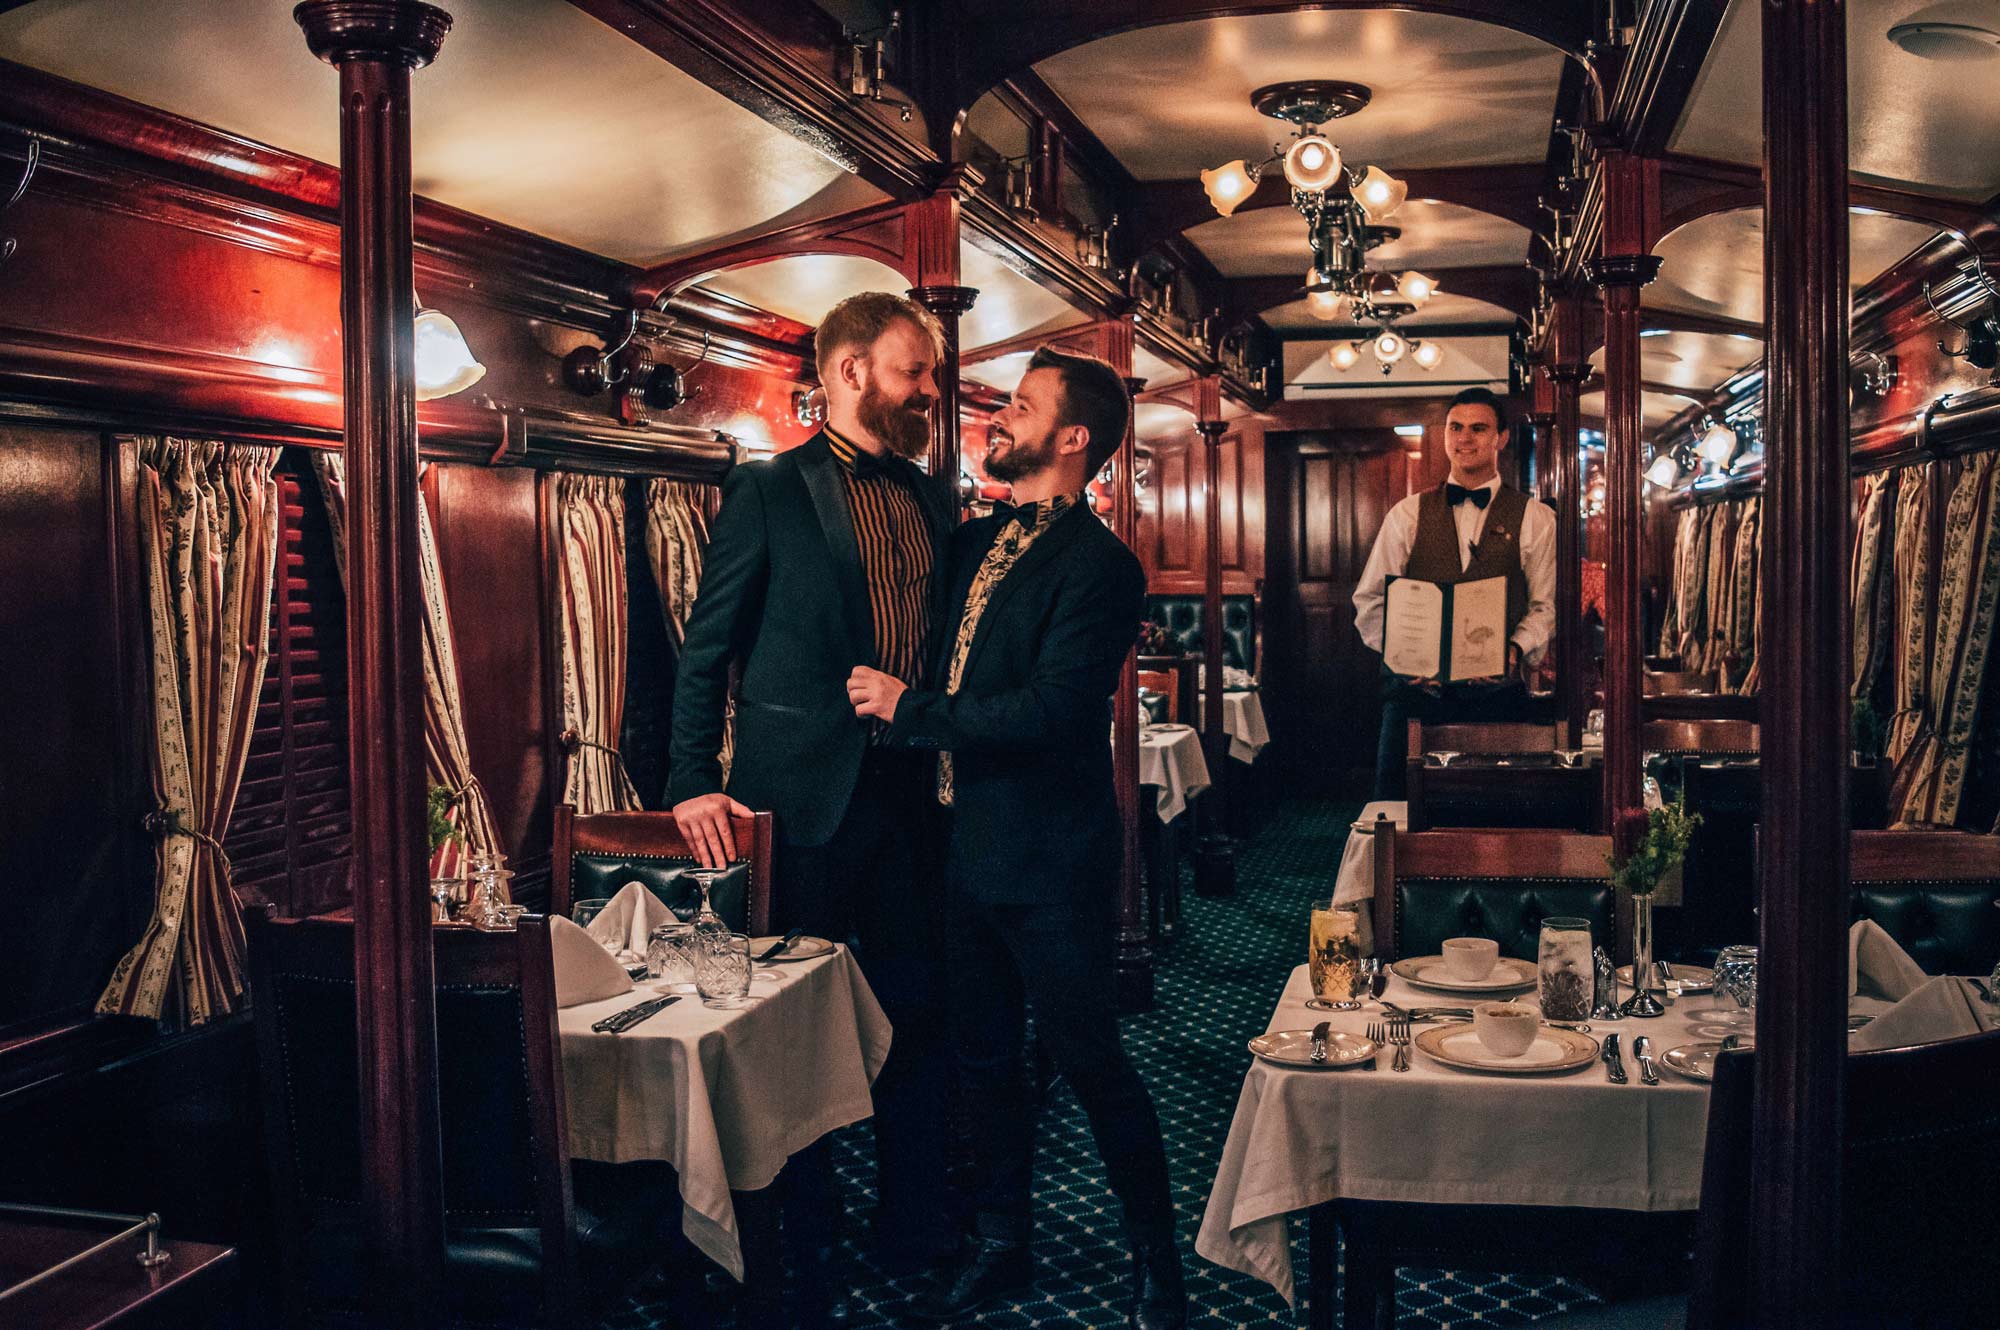 Zugreise Afrika Southern Africa Train Safari with Rovos Rail Jacket and (bow) tie for the dining car with a daily 5-course dinner menu (vegetarian friendly) © Coupleofmen.com